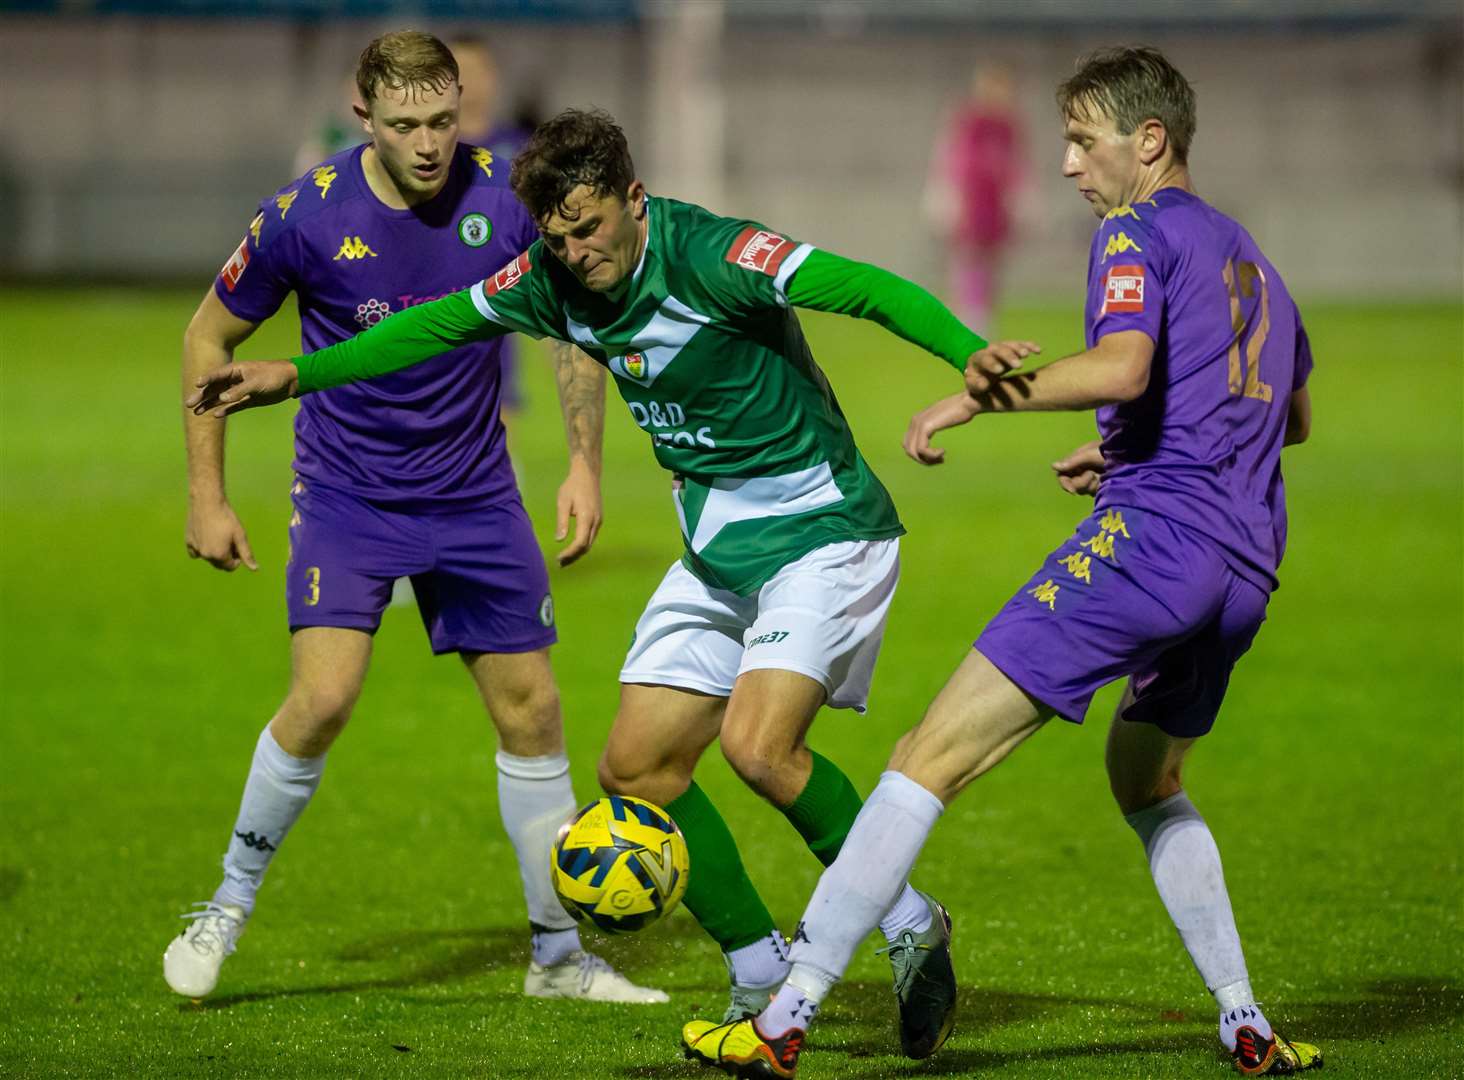 Rhyle Ovenden picks his way past two Burgess Hill players. Picture: Ian Scammell